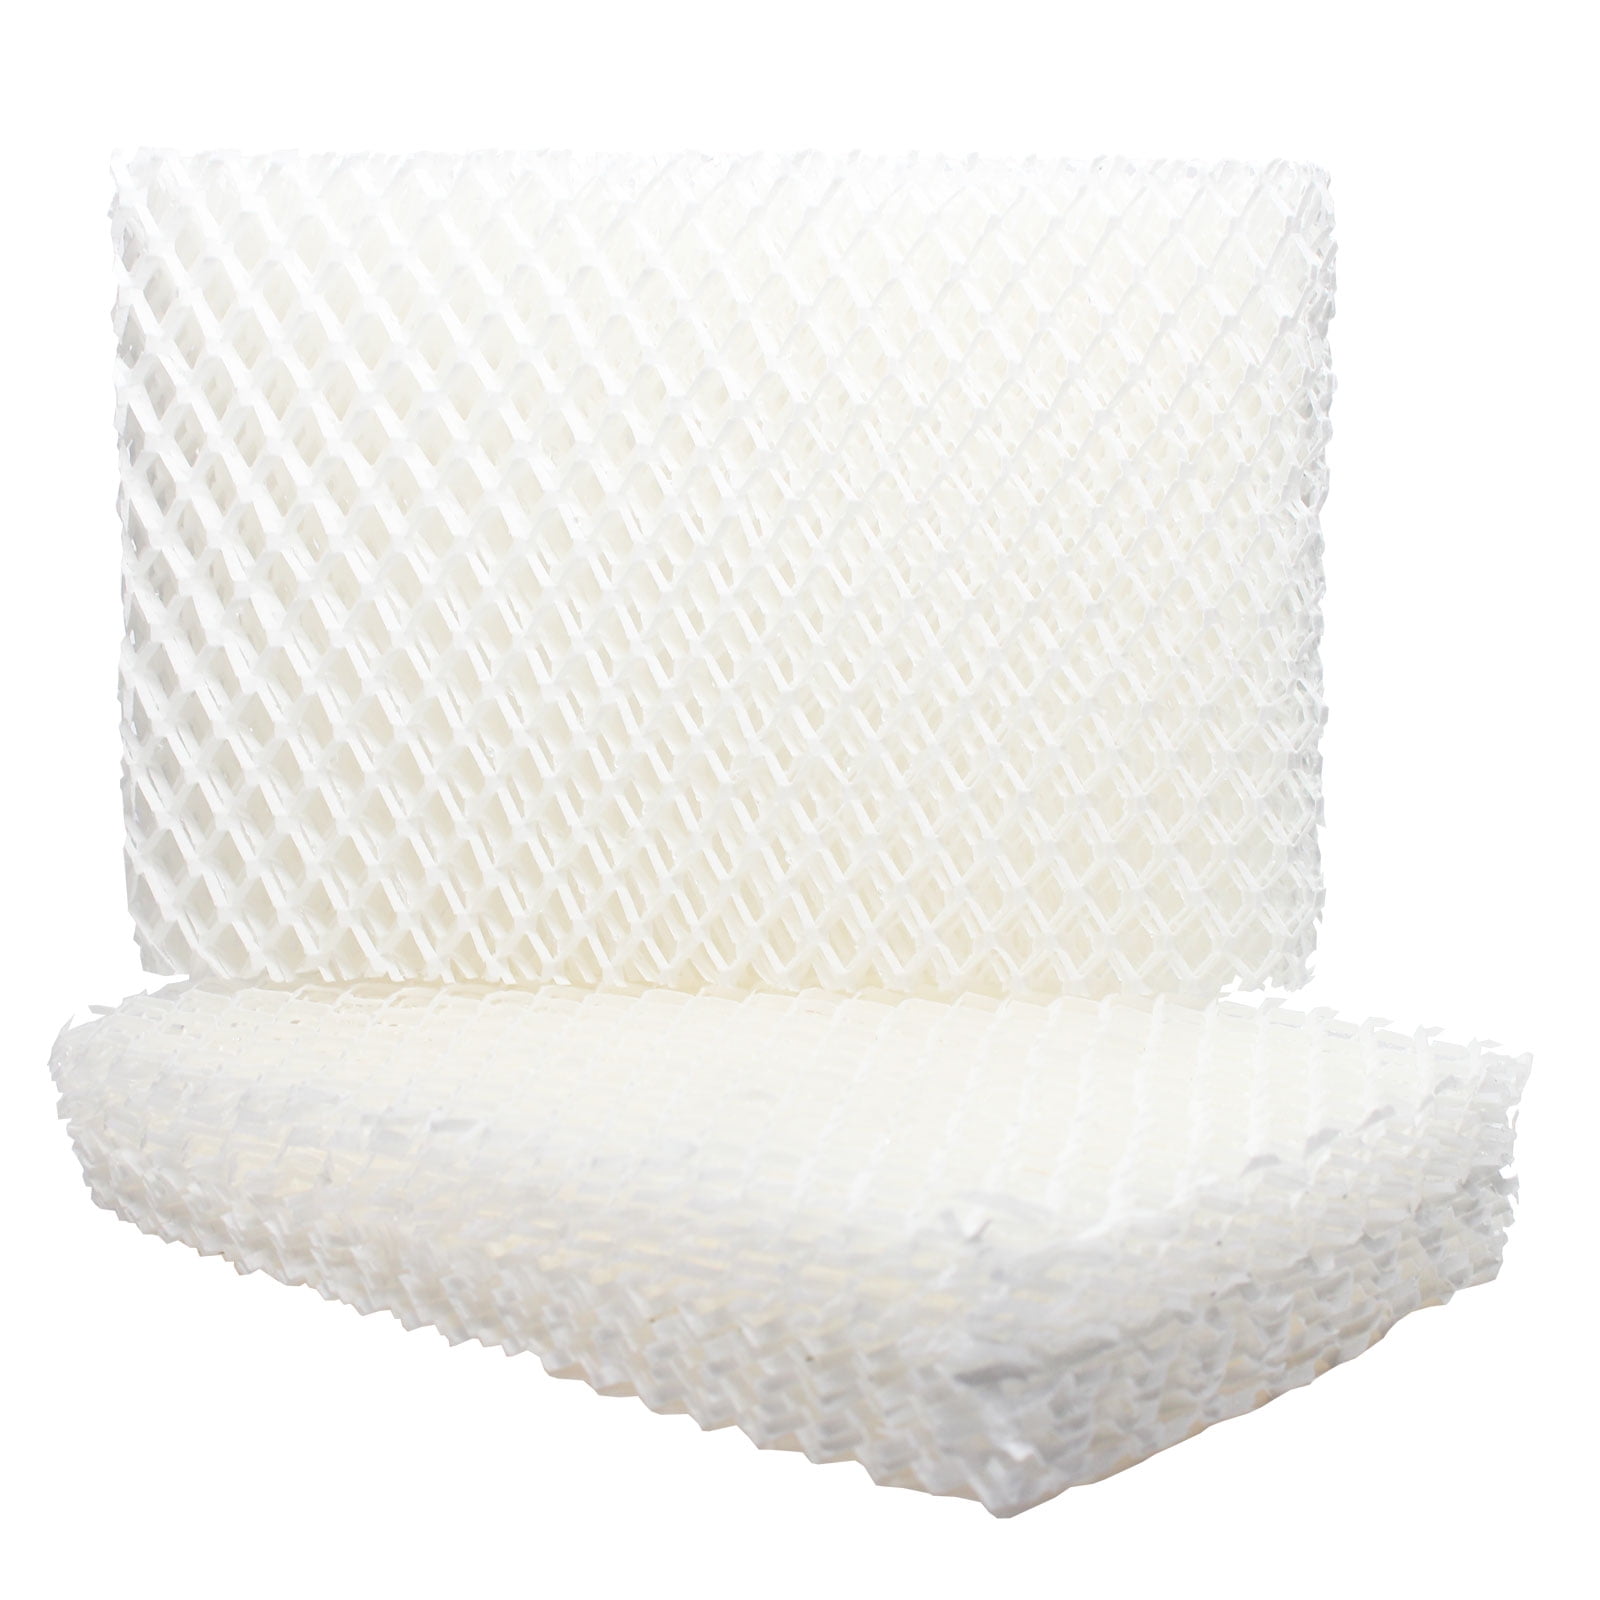 Kenmore 758144150 4X Humidifier Filter for Sears 